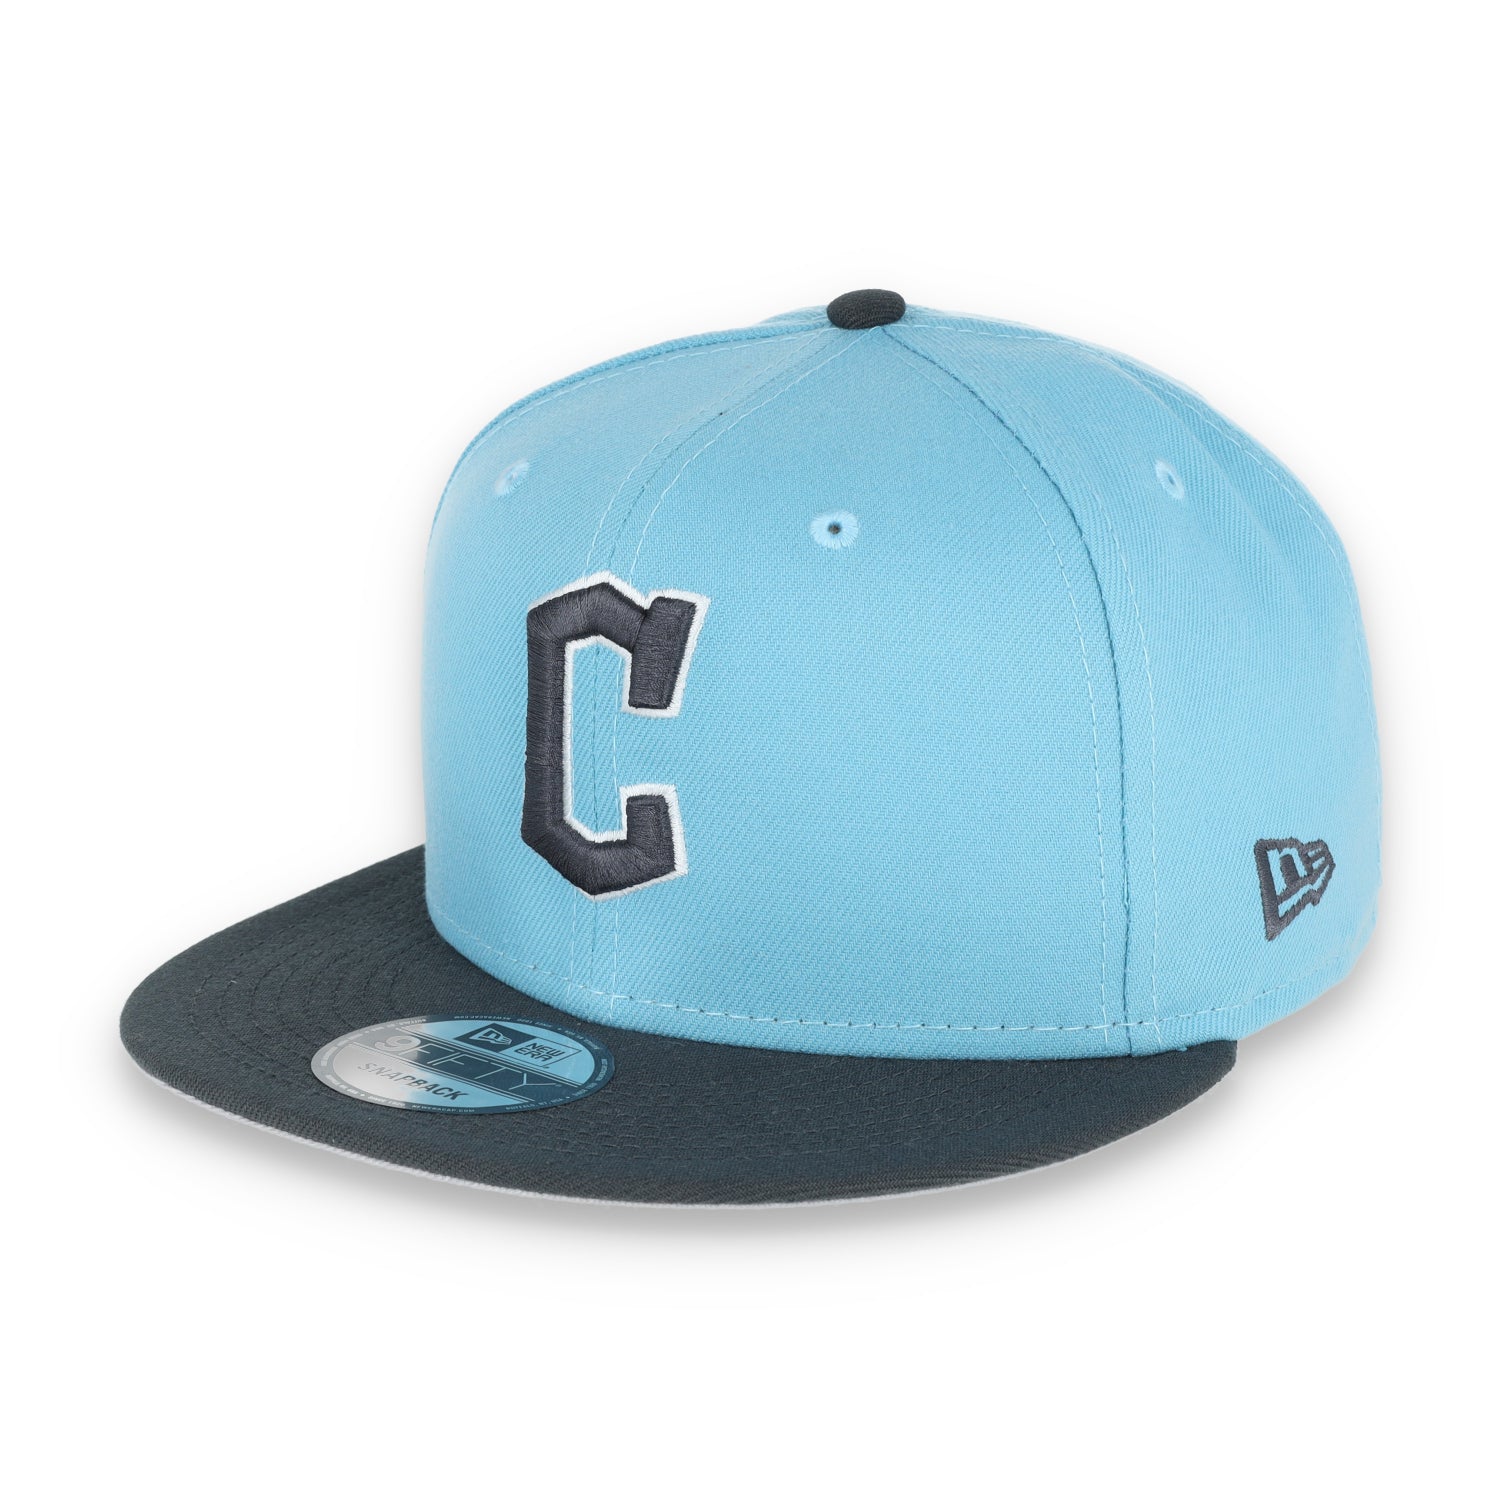 NEW ERA CLEVELAND INDIANS 9FIFTY COLOR PACK SNAPBACK-BLUE